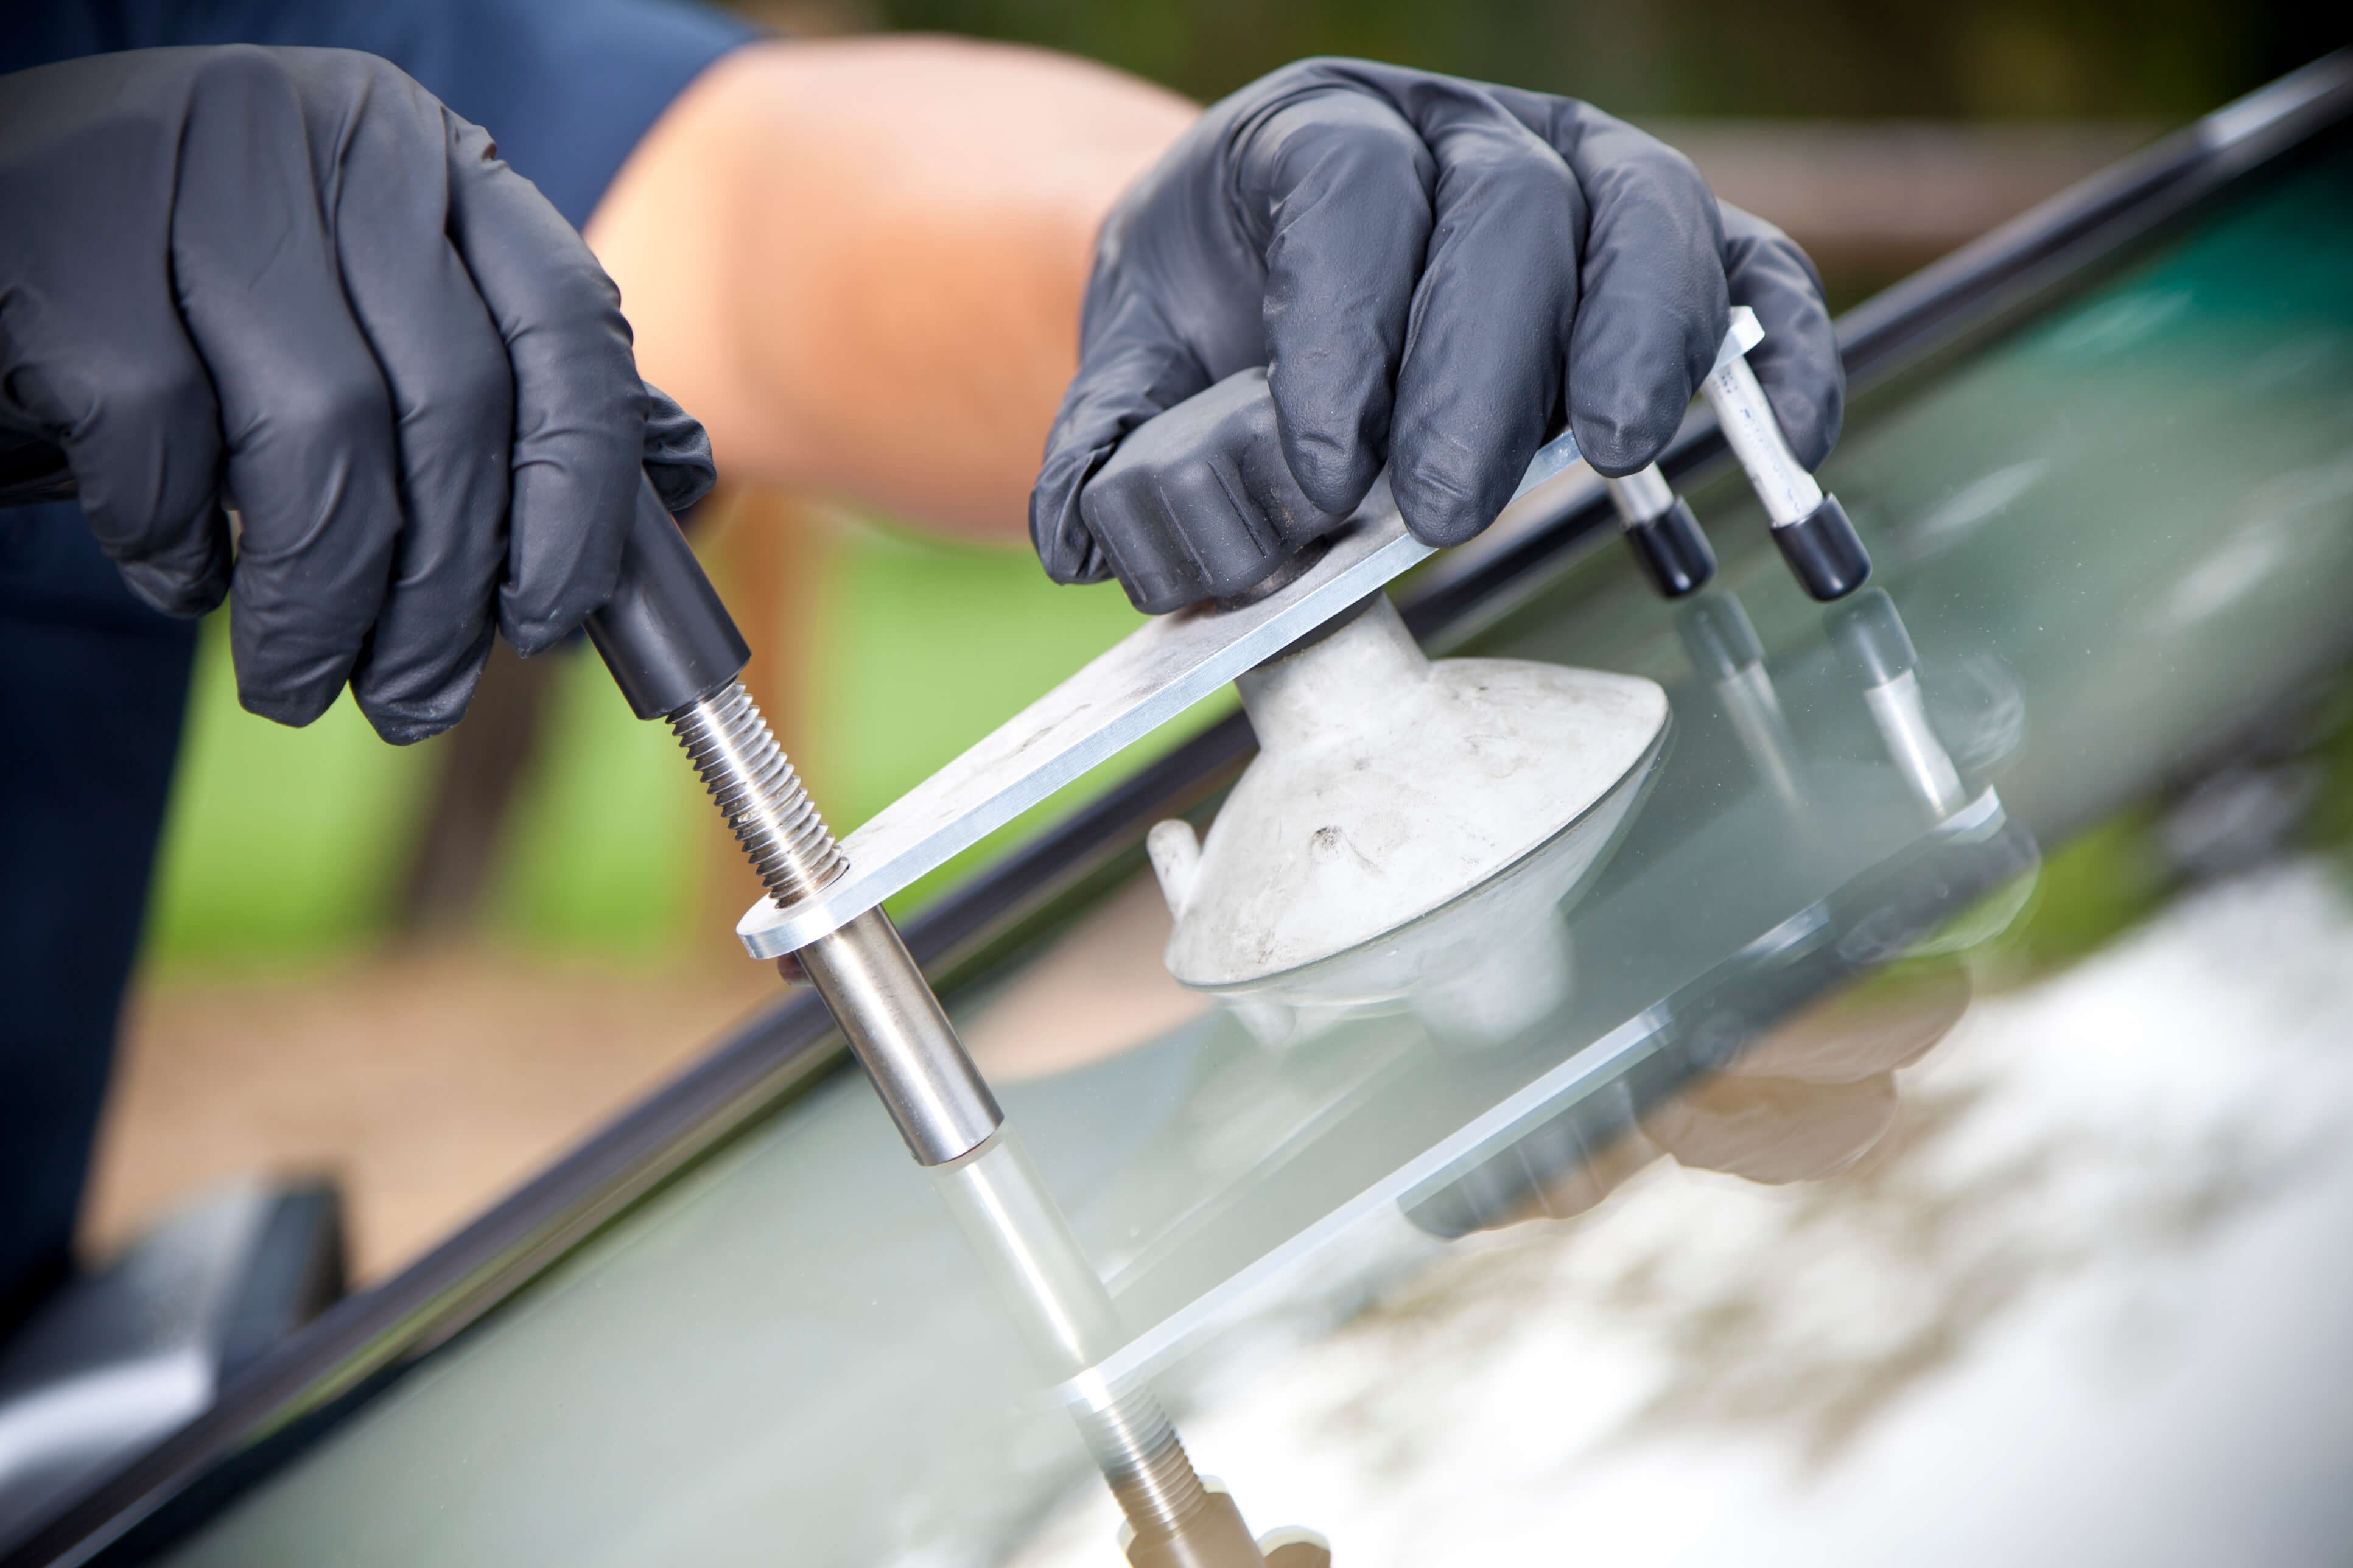 Windshield Repair Mississauga - In N Out Car Wash How Much To Get A Windshield Replaced